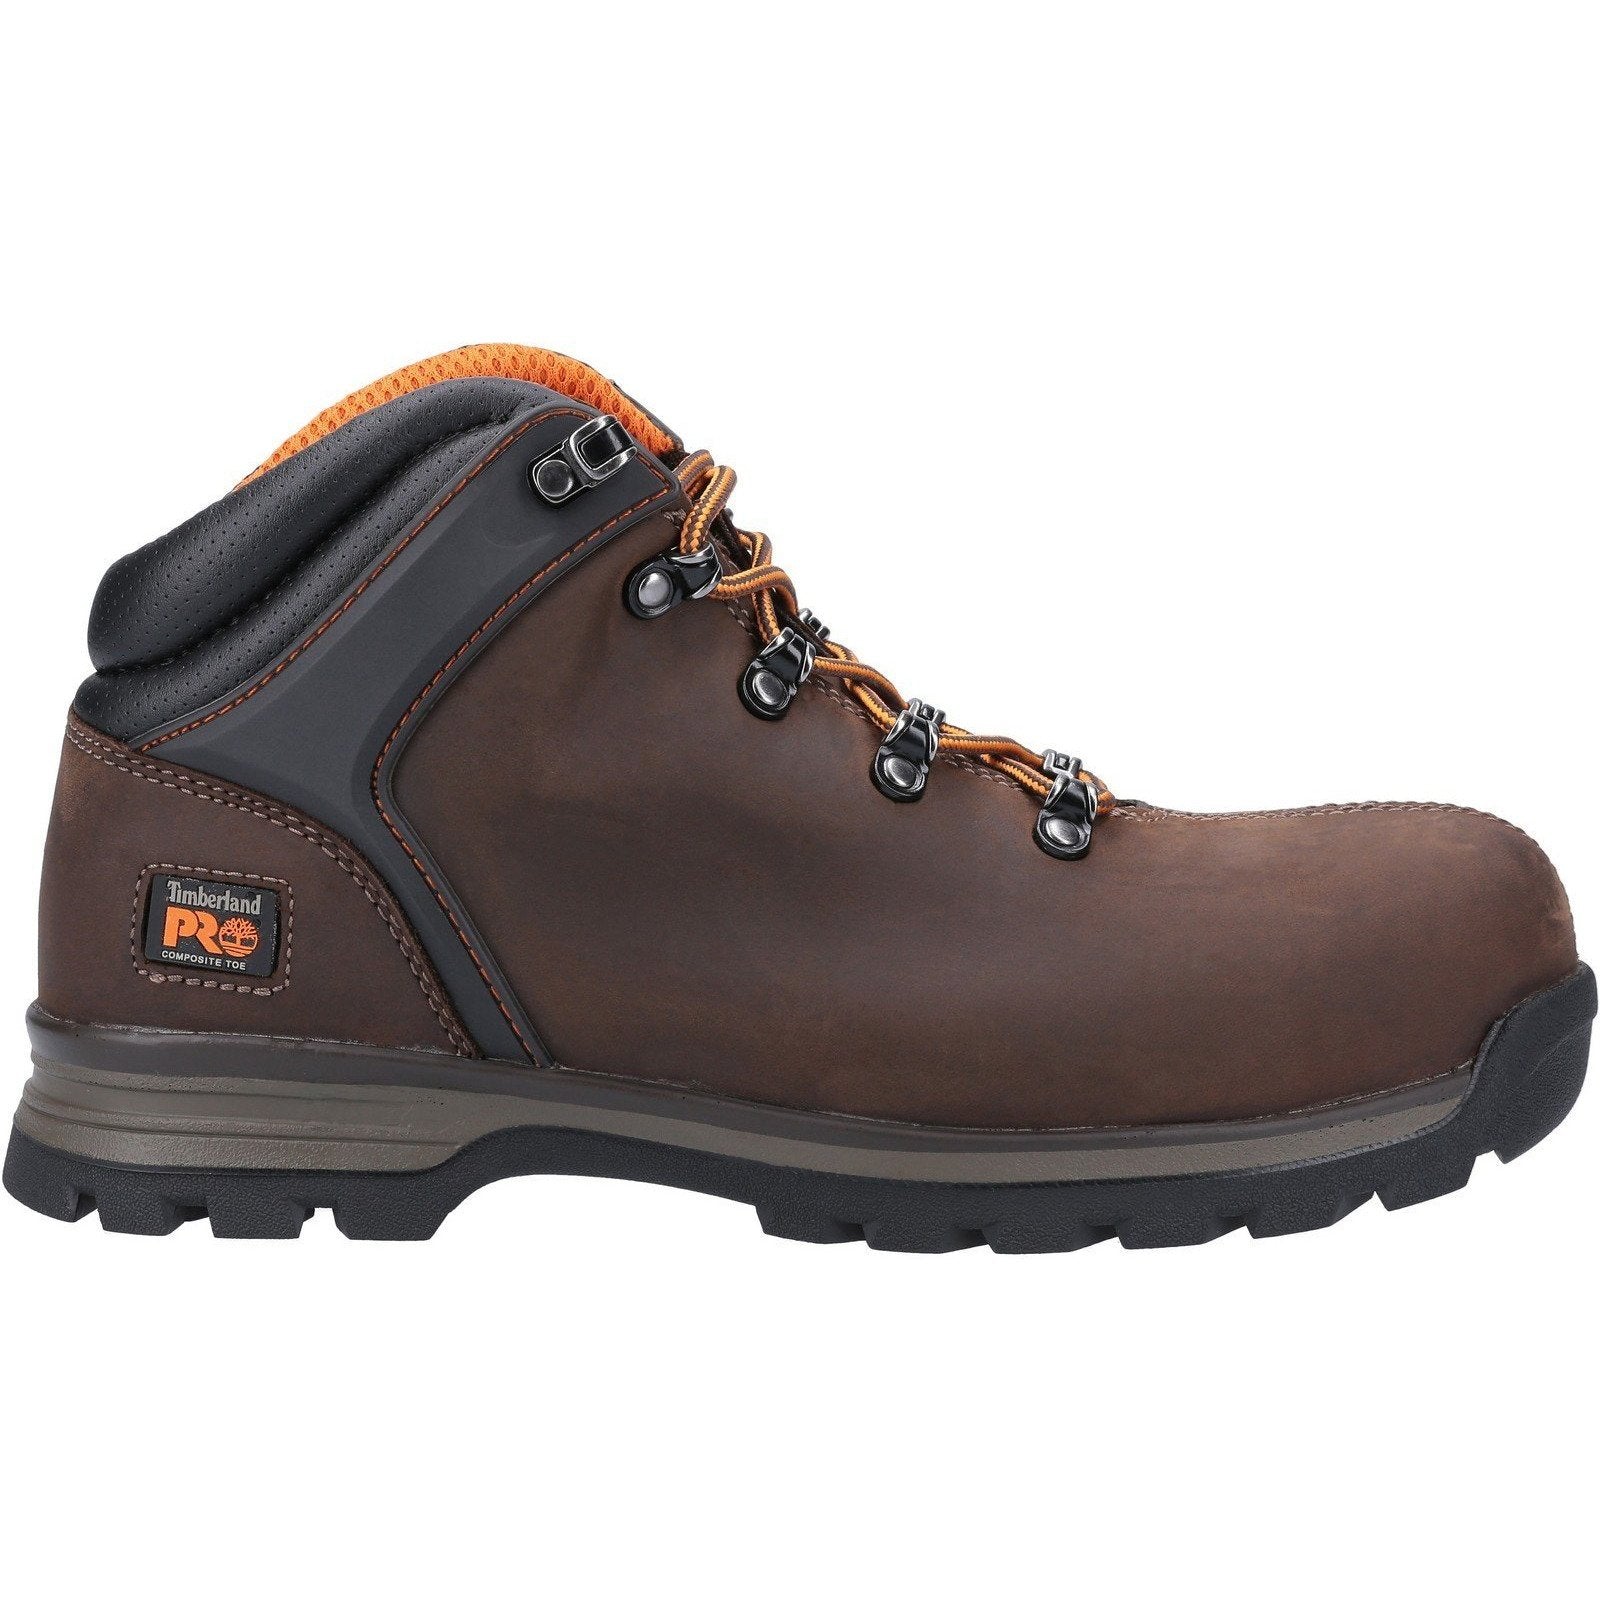 Timberland Pro NEW Splitrock XT Safety Work Boot with Composite Toe Ca ...